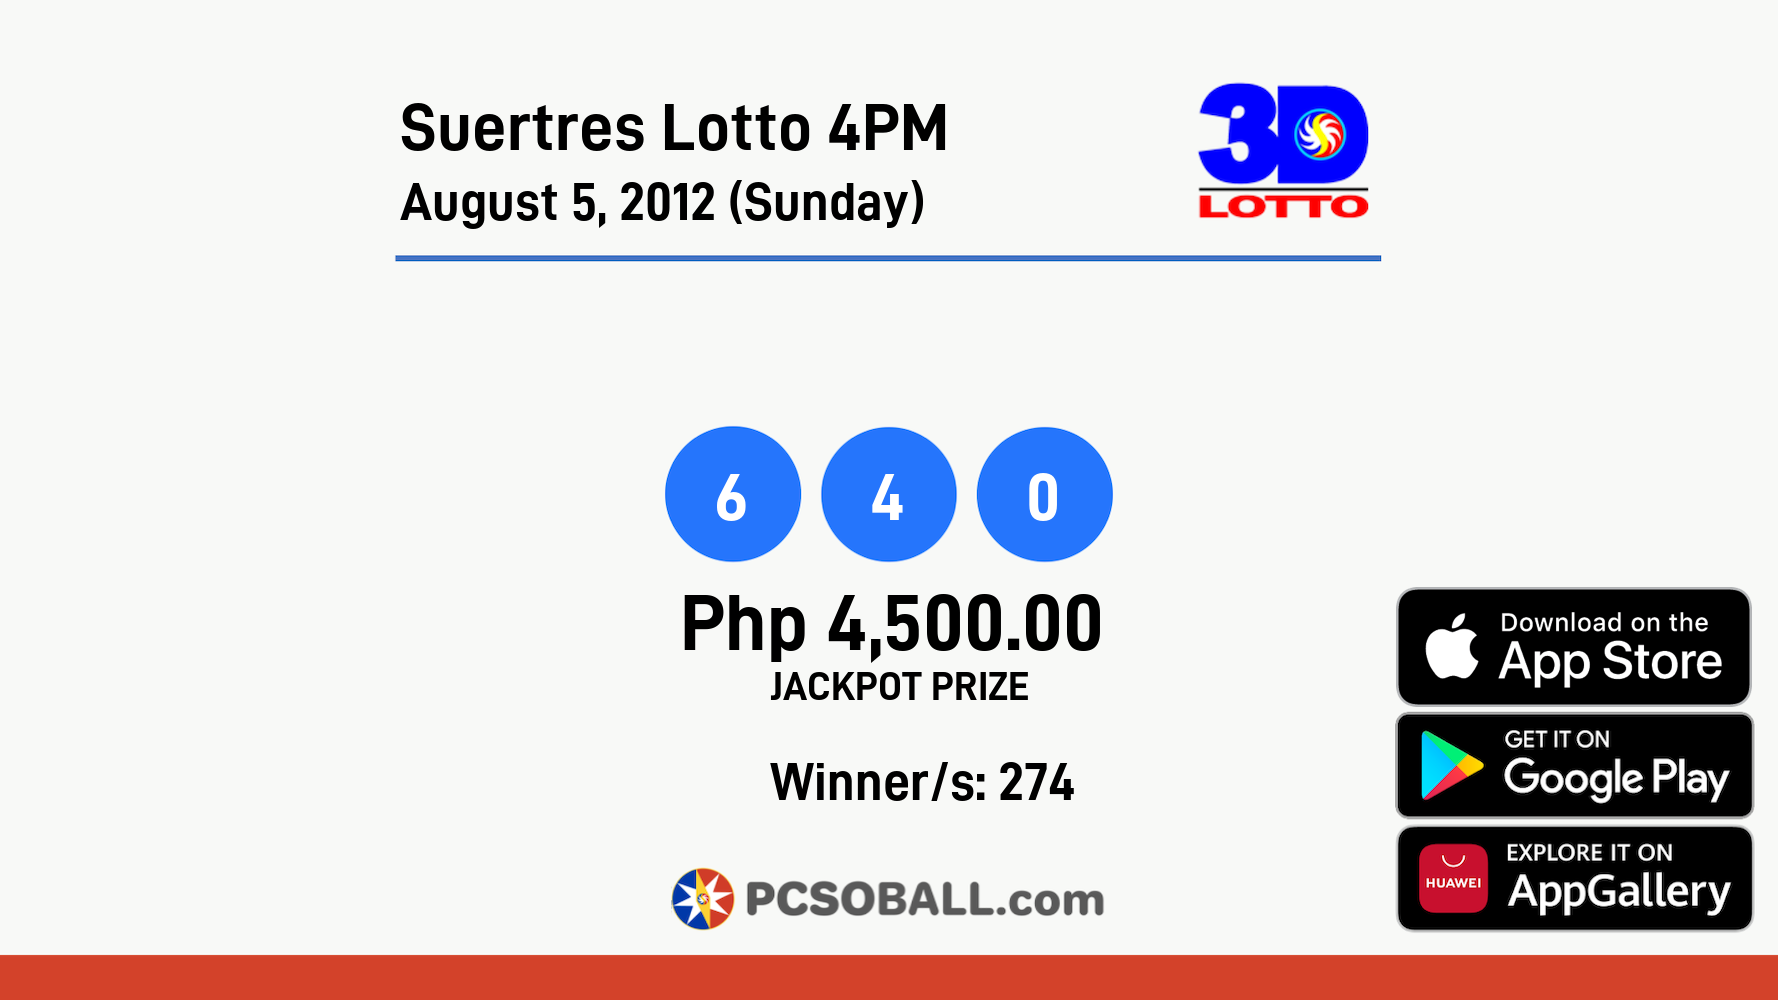 Suertres Lotto 4PM August 5, 2012 (Sunday) Result